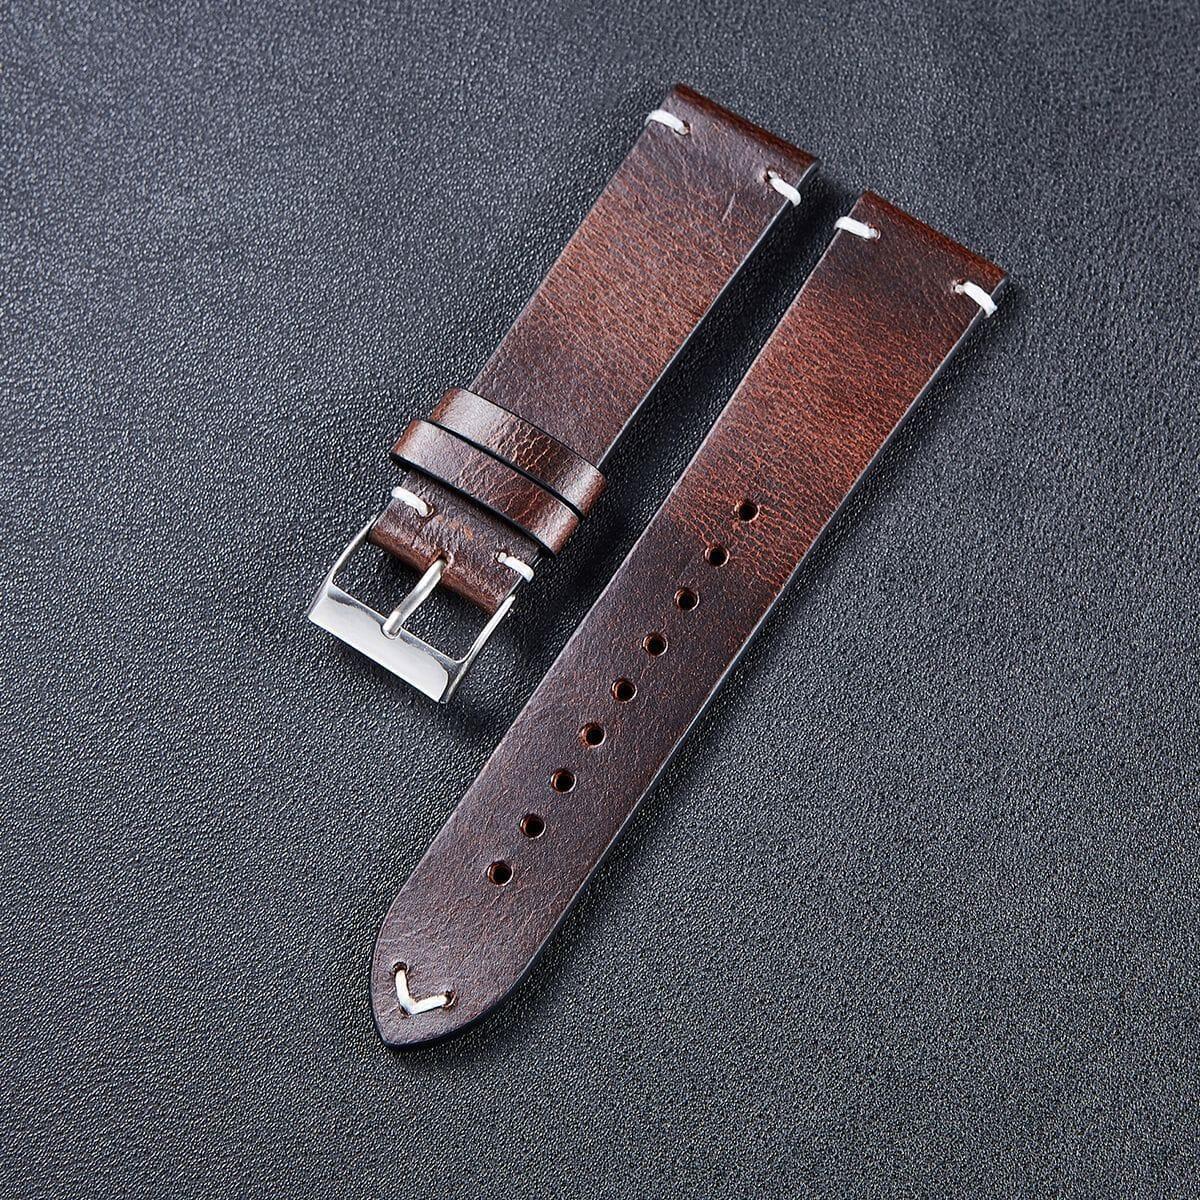 Vintage Oiled Leather Watch Straps Compatible with the TRIWA Falcon